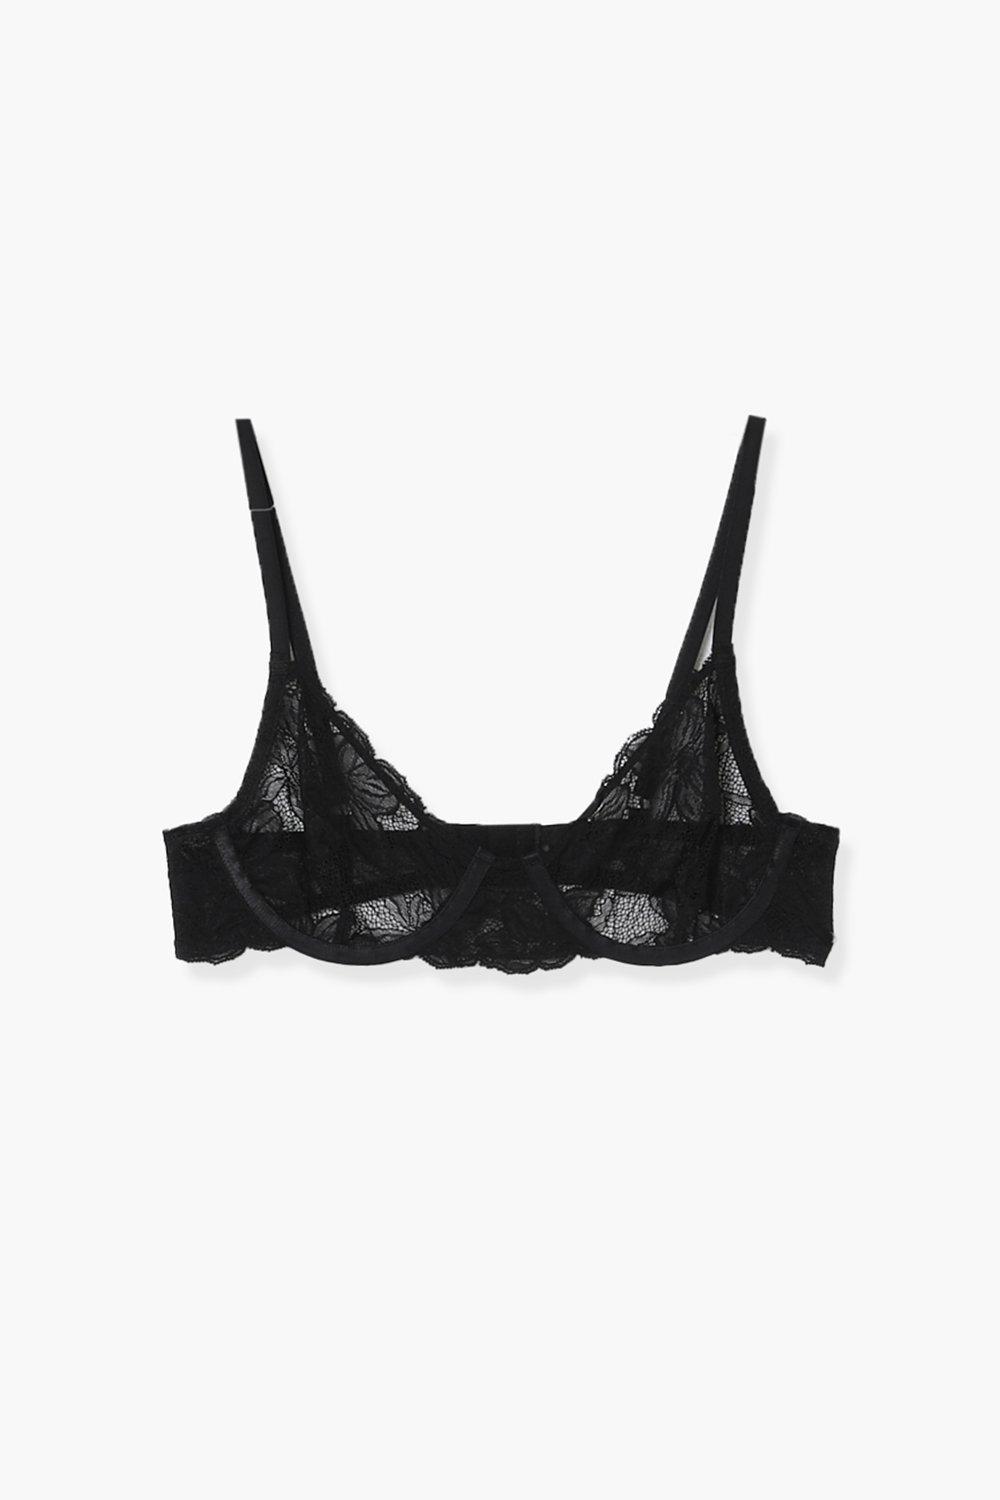 CHARADE Black and Lace Bra 30G  Lace bra, Fashion trends, Lace